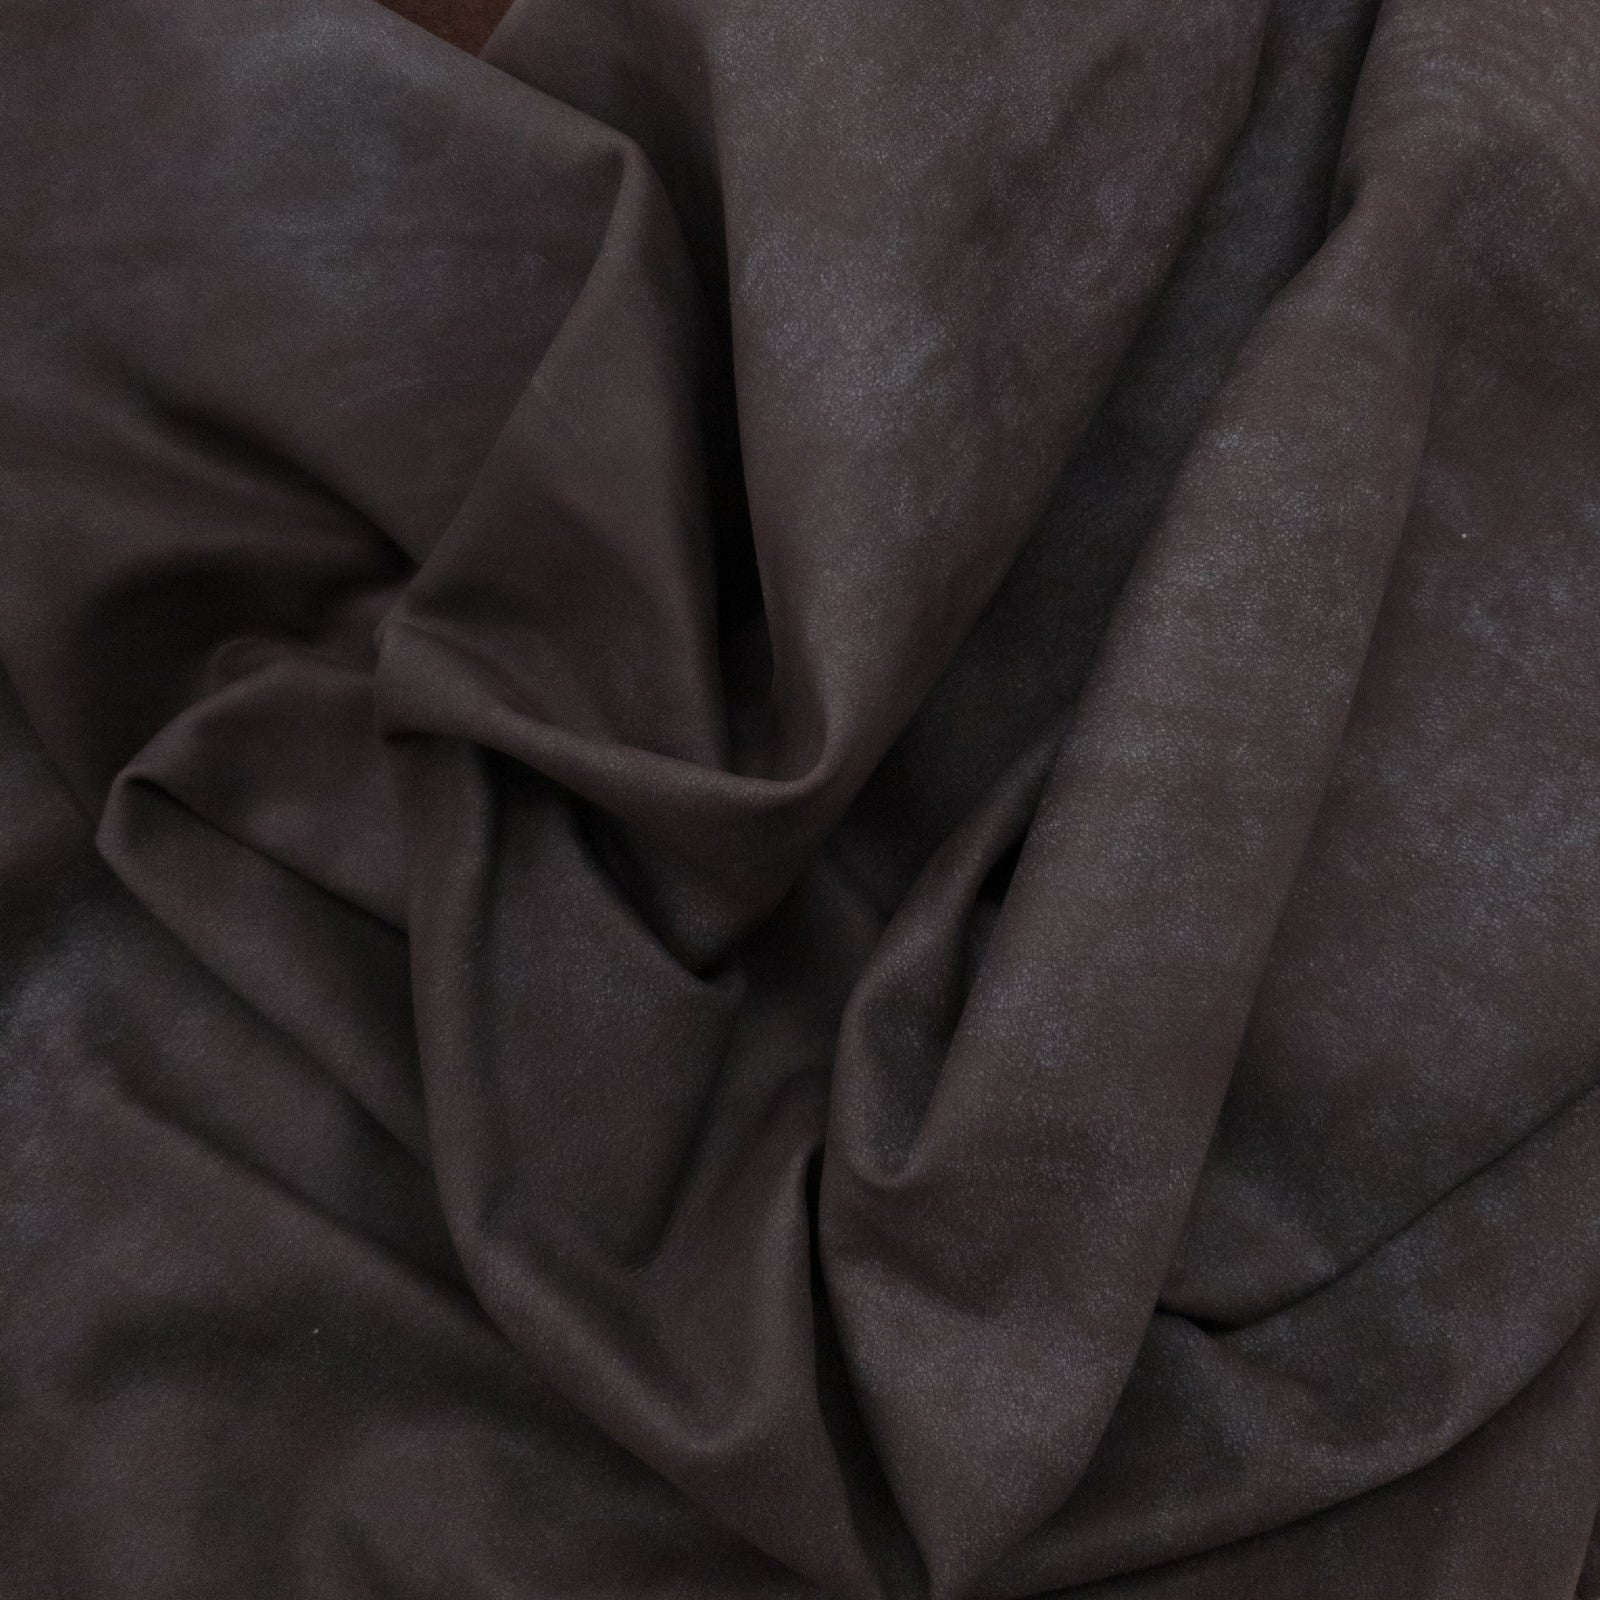 Dark Browns, 3-10 Sq Ft, 1-3 oz, Lamb Hides, Ashy Brown / 7-8 / 1-2 oz (.4-.8 MM) | The Leather Guy